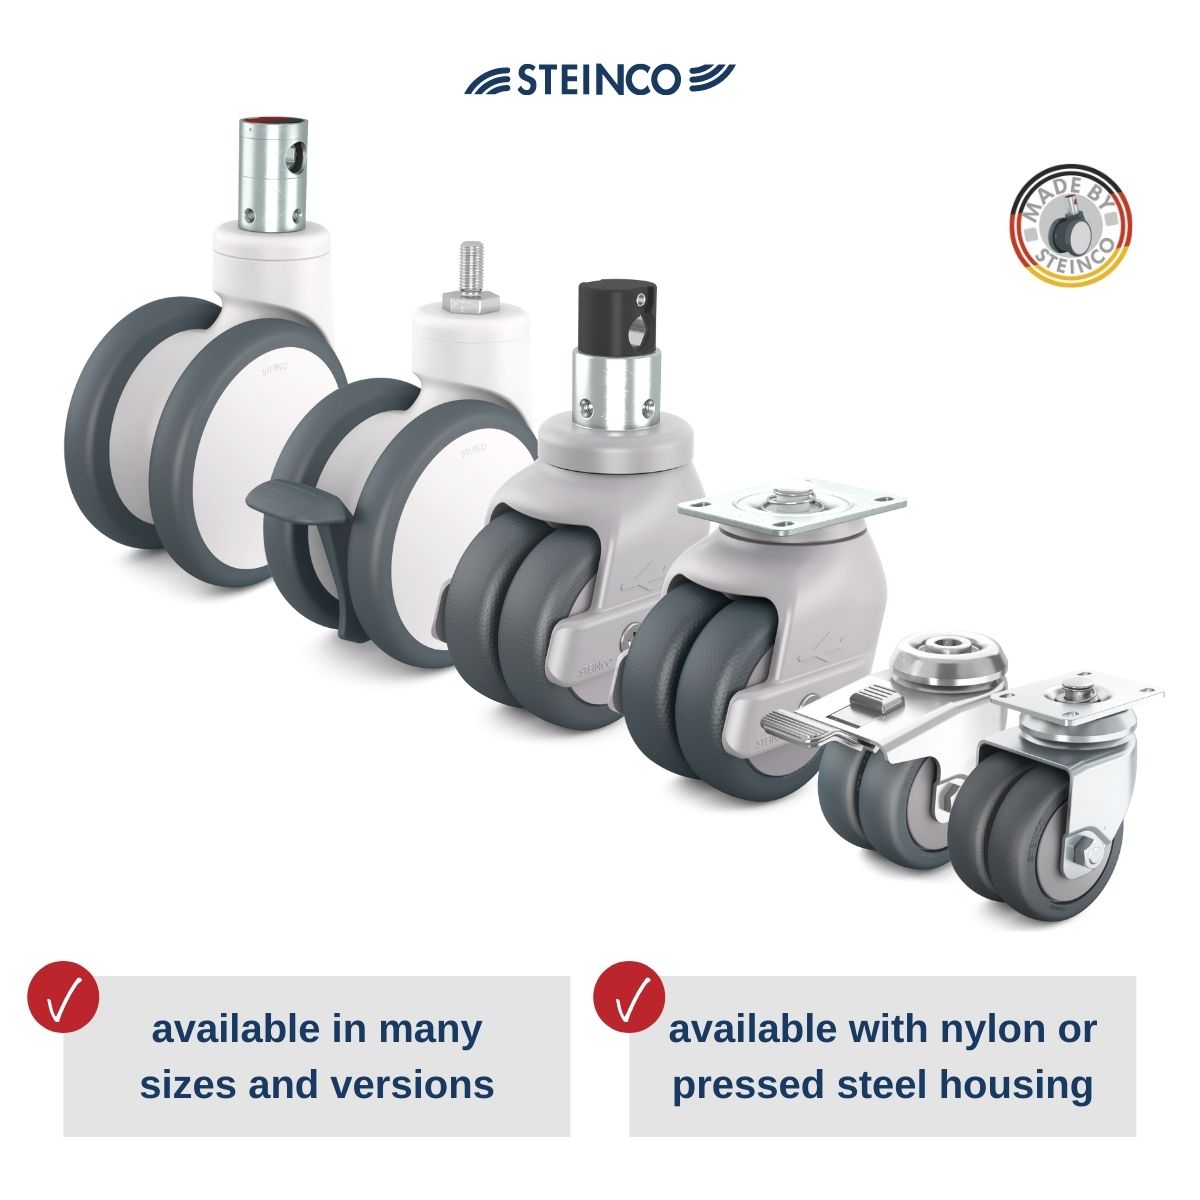 Twin wheel casters and twin wheel swivel casters with nylon and pressed steel housing in many sizes and versions